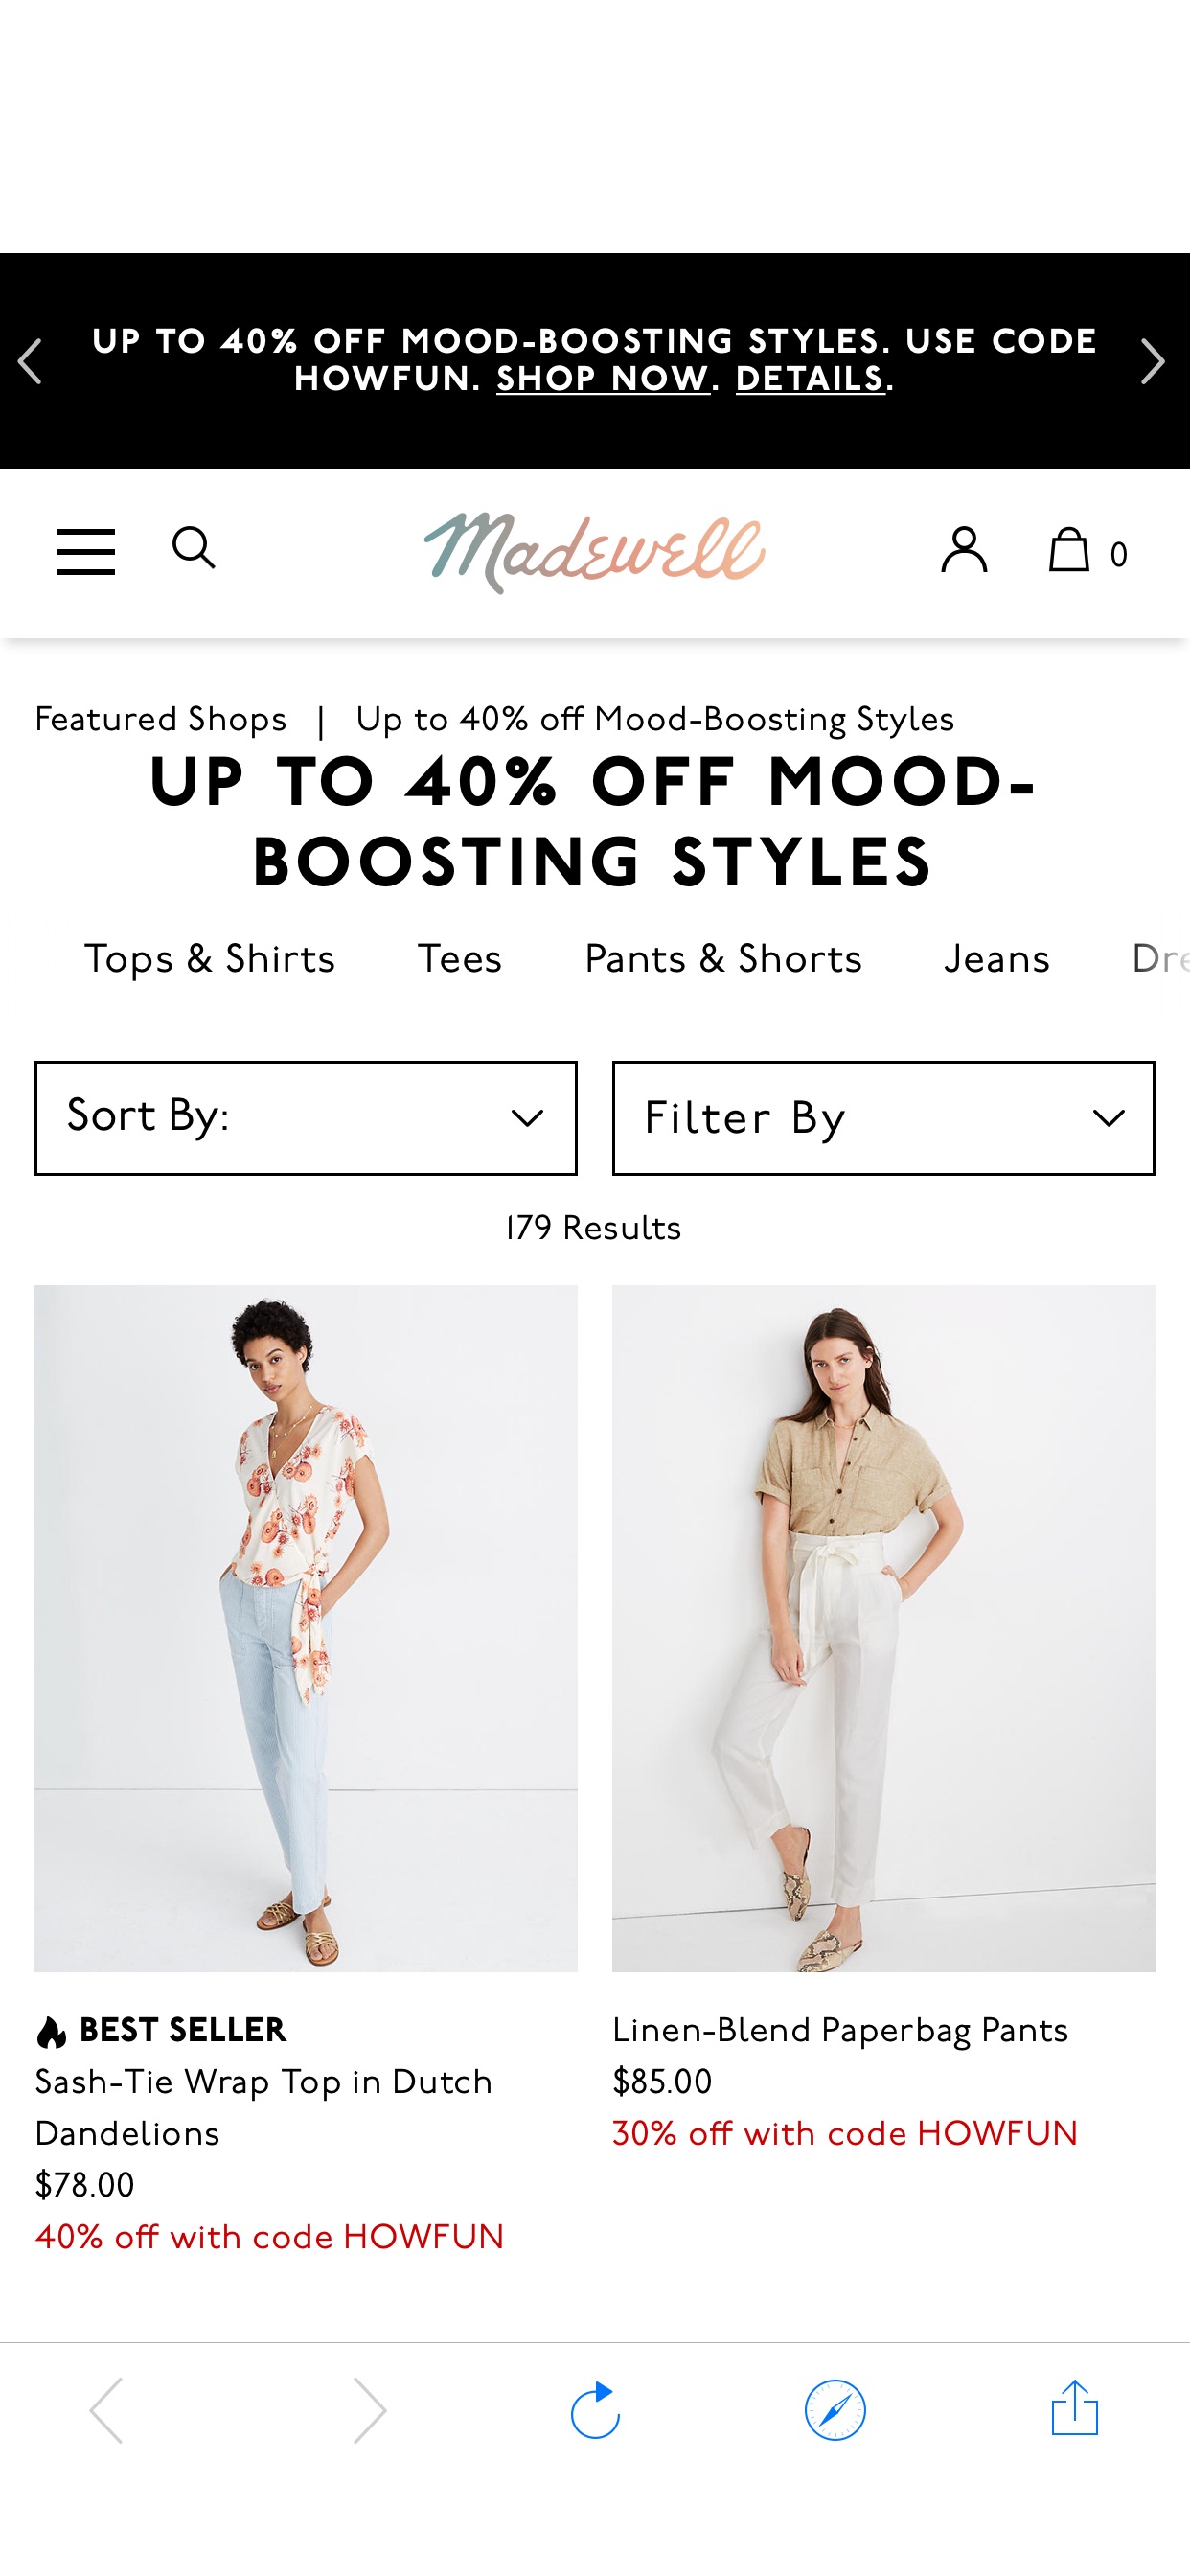 Up to 40% off Mood-Boosting Styles | Madewell